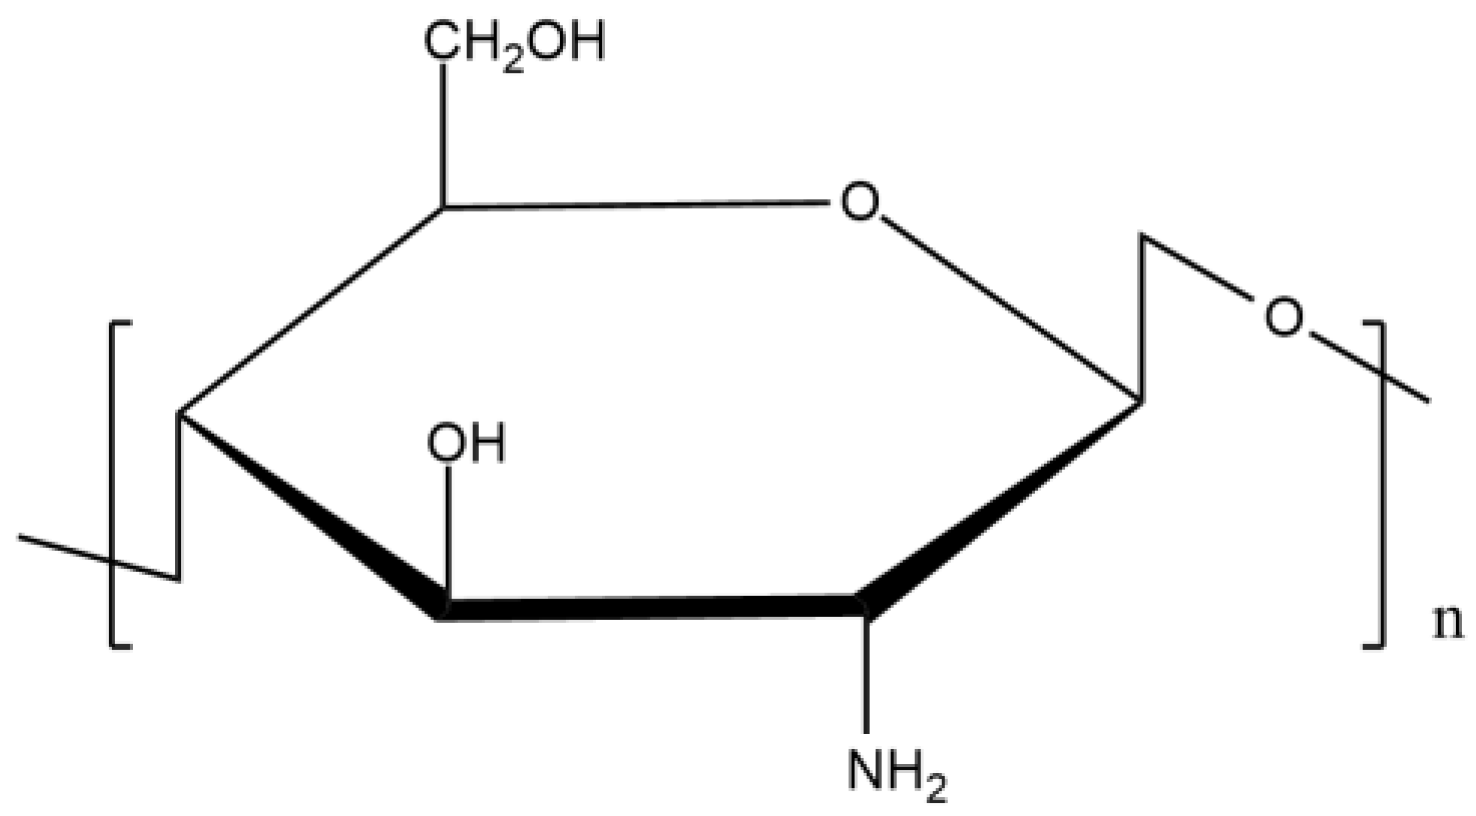 Chemical structure of chitosan.